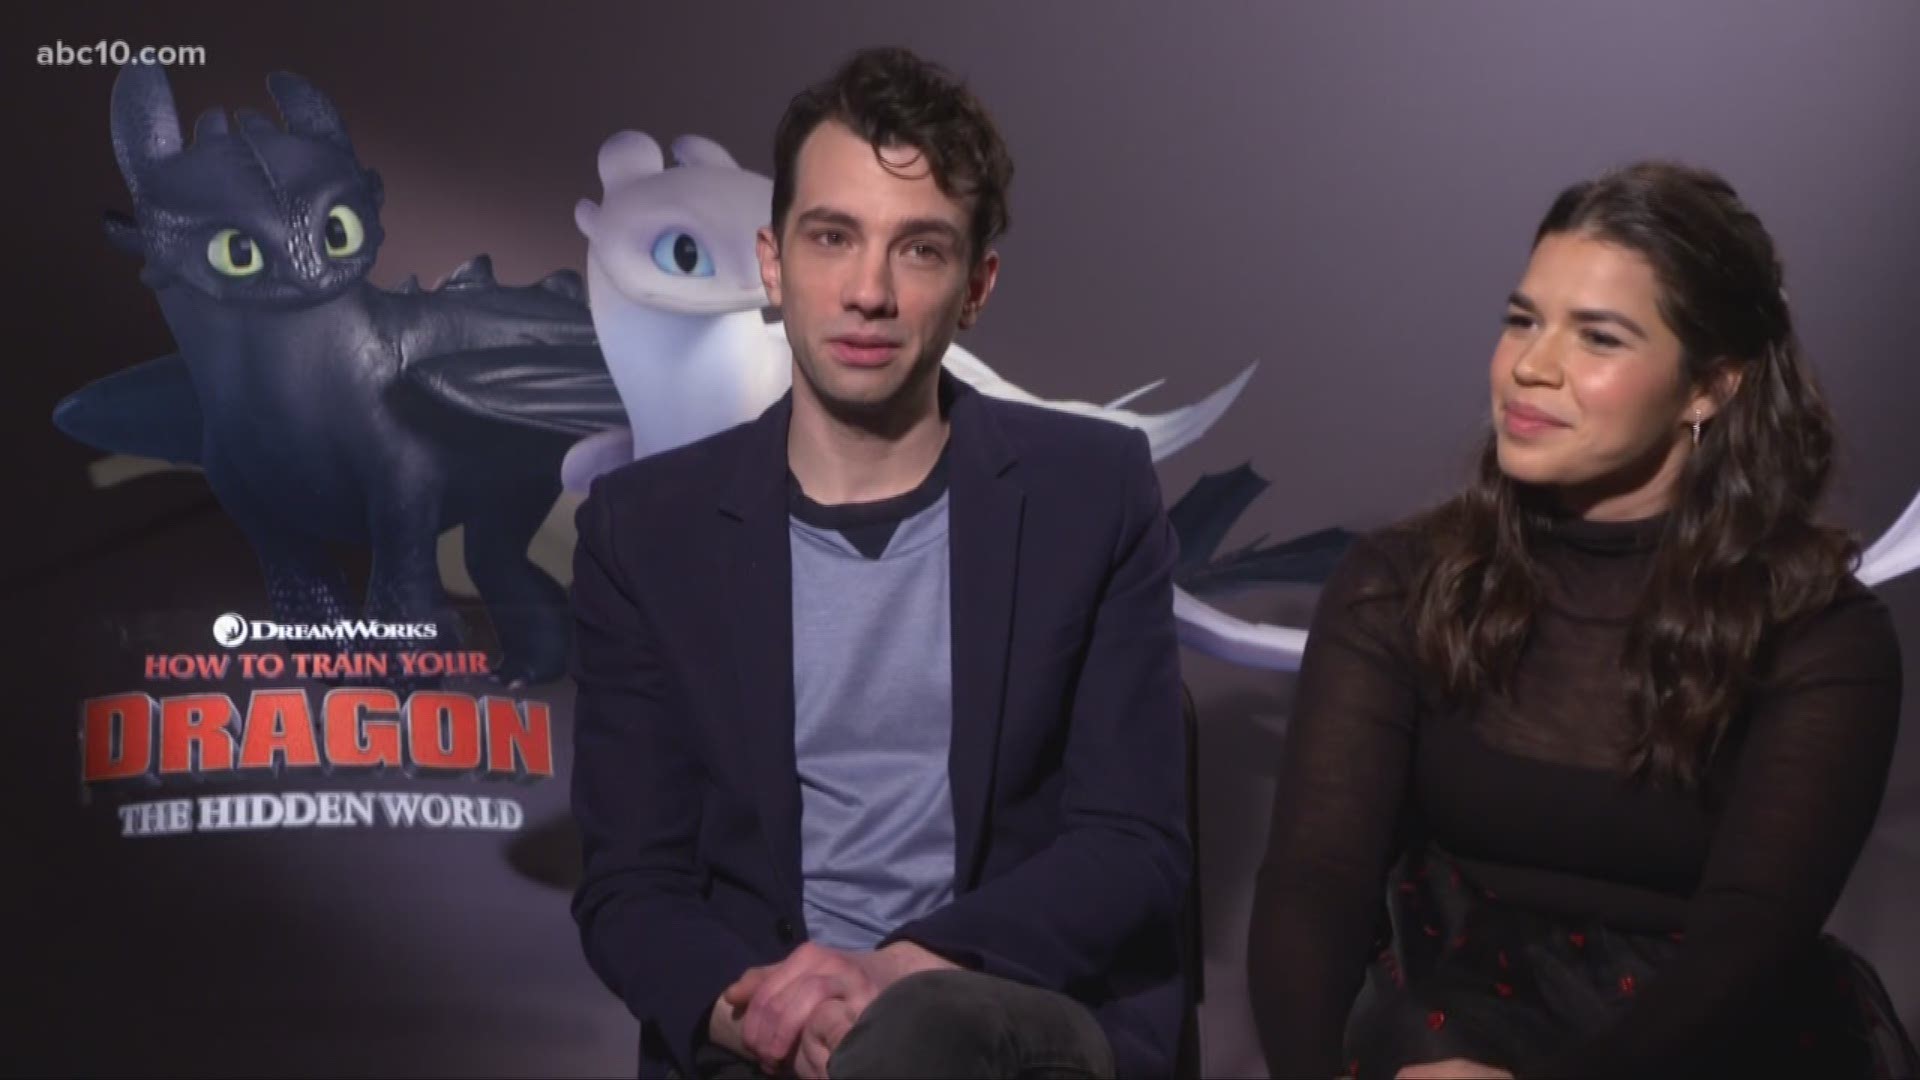 Mark S. Allen sat down with Jay Baruchel and America Ferrera to talk about "How to Train Your Dragon: The Hidden World."